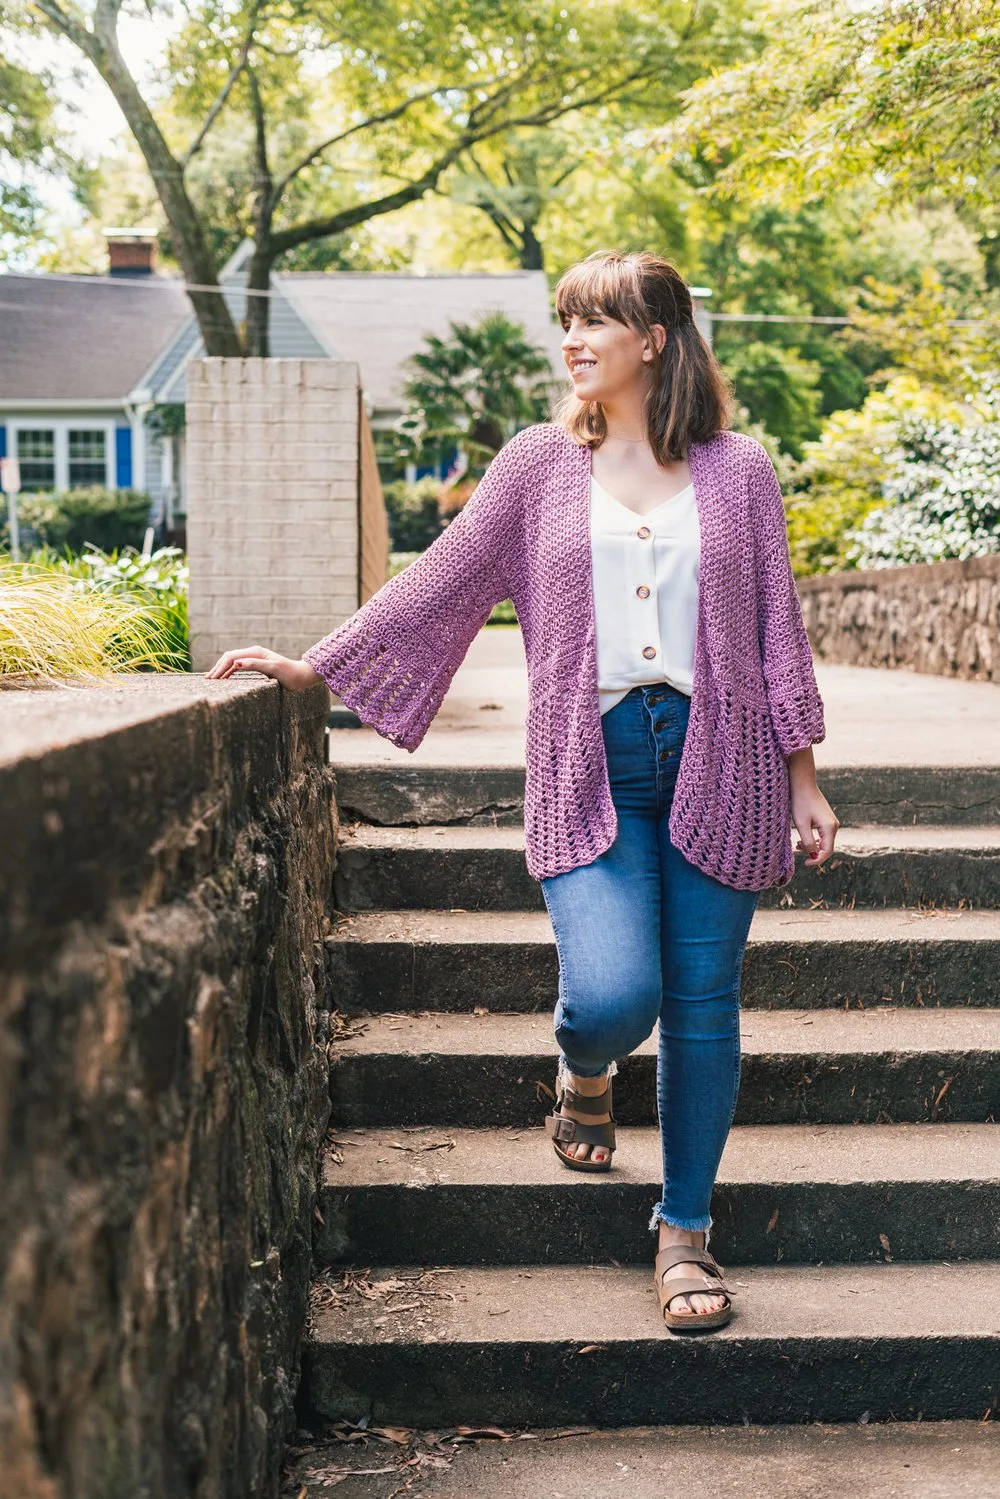 5 Duster Cardigans to Try This Spring